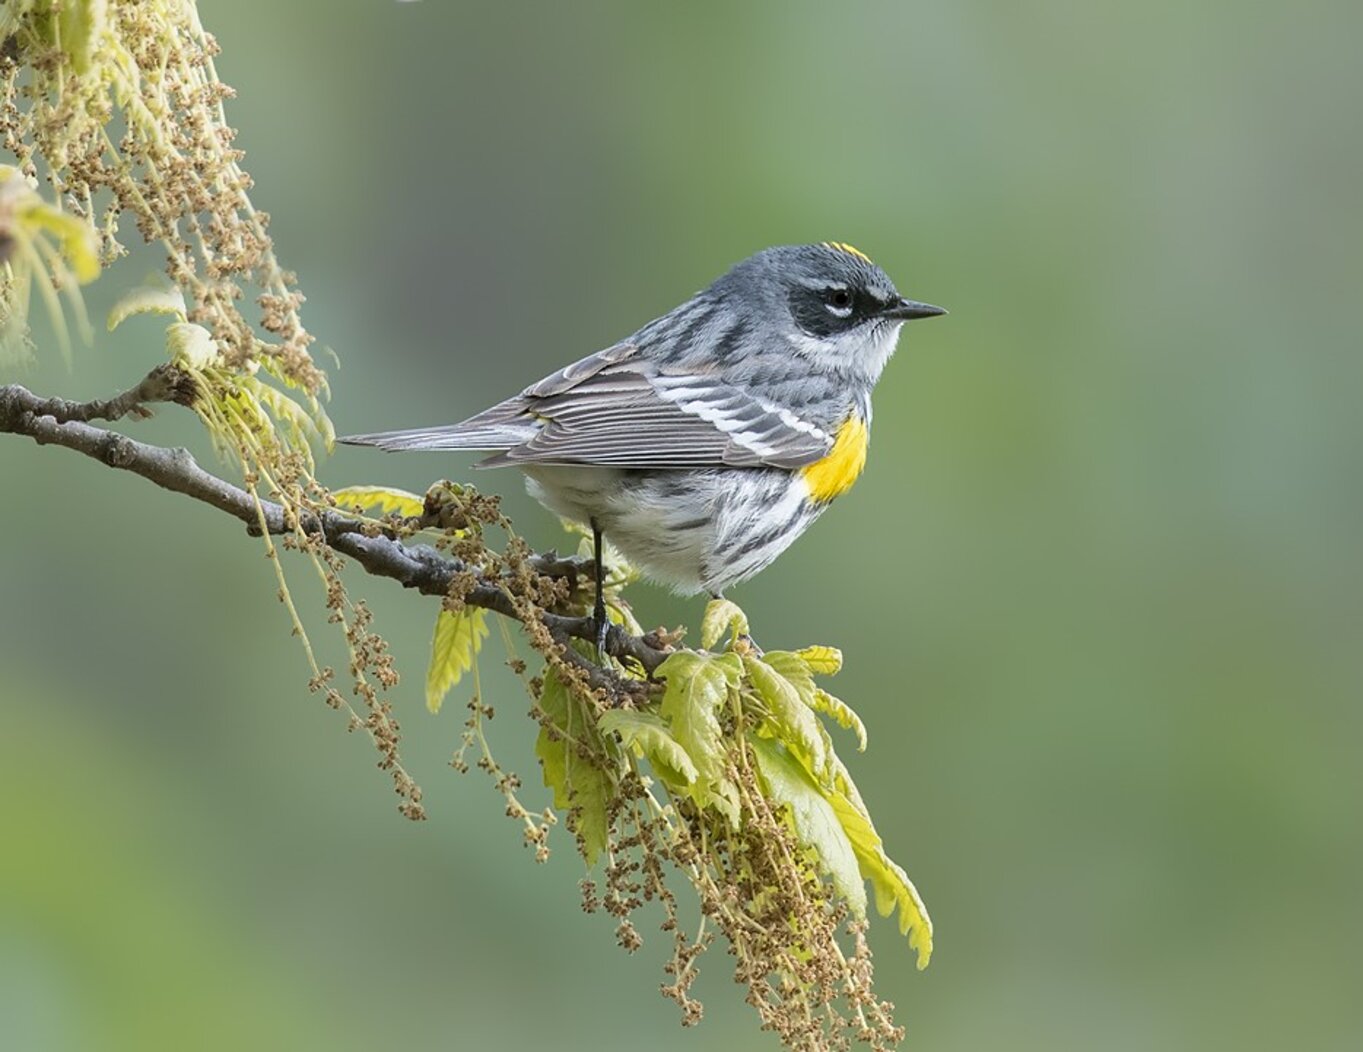 Yellow-rumped Warblers are among the more than 20 warblers species documented in East River Park. Photo: David Speiser